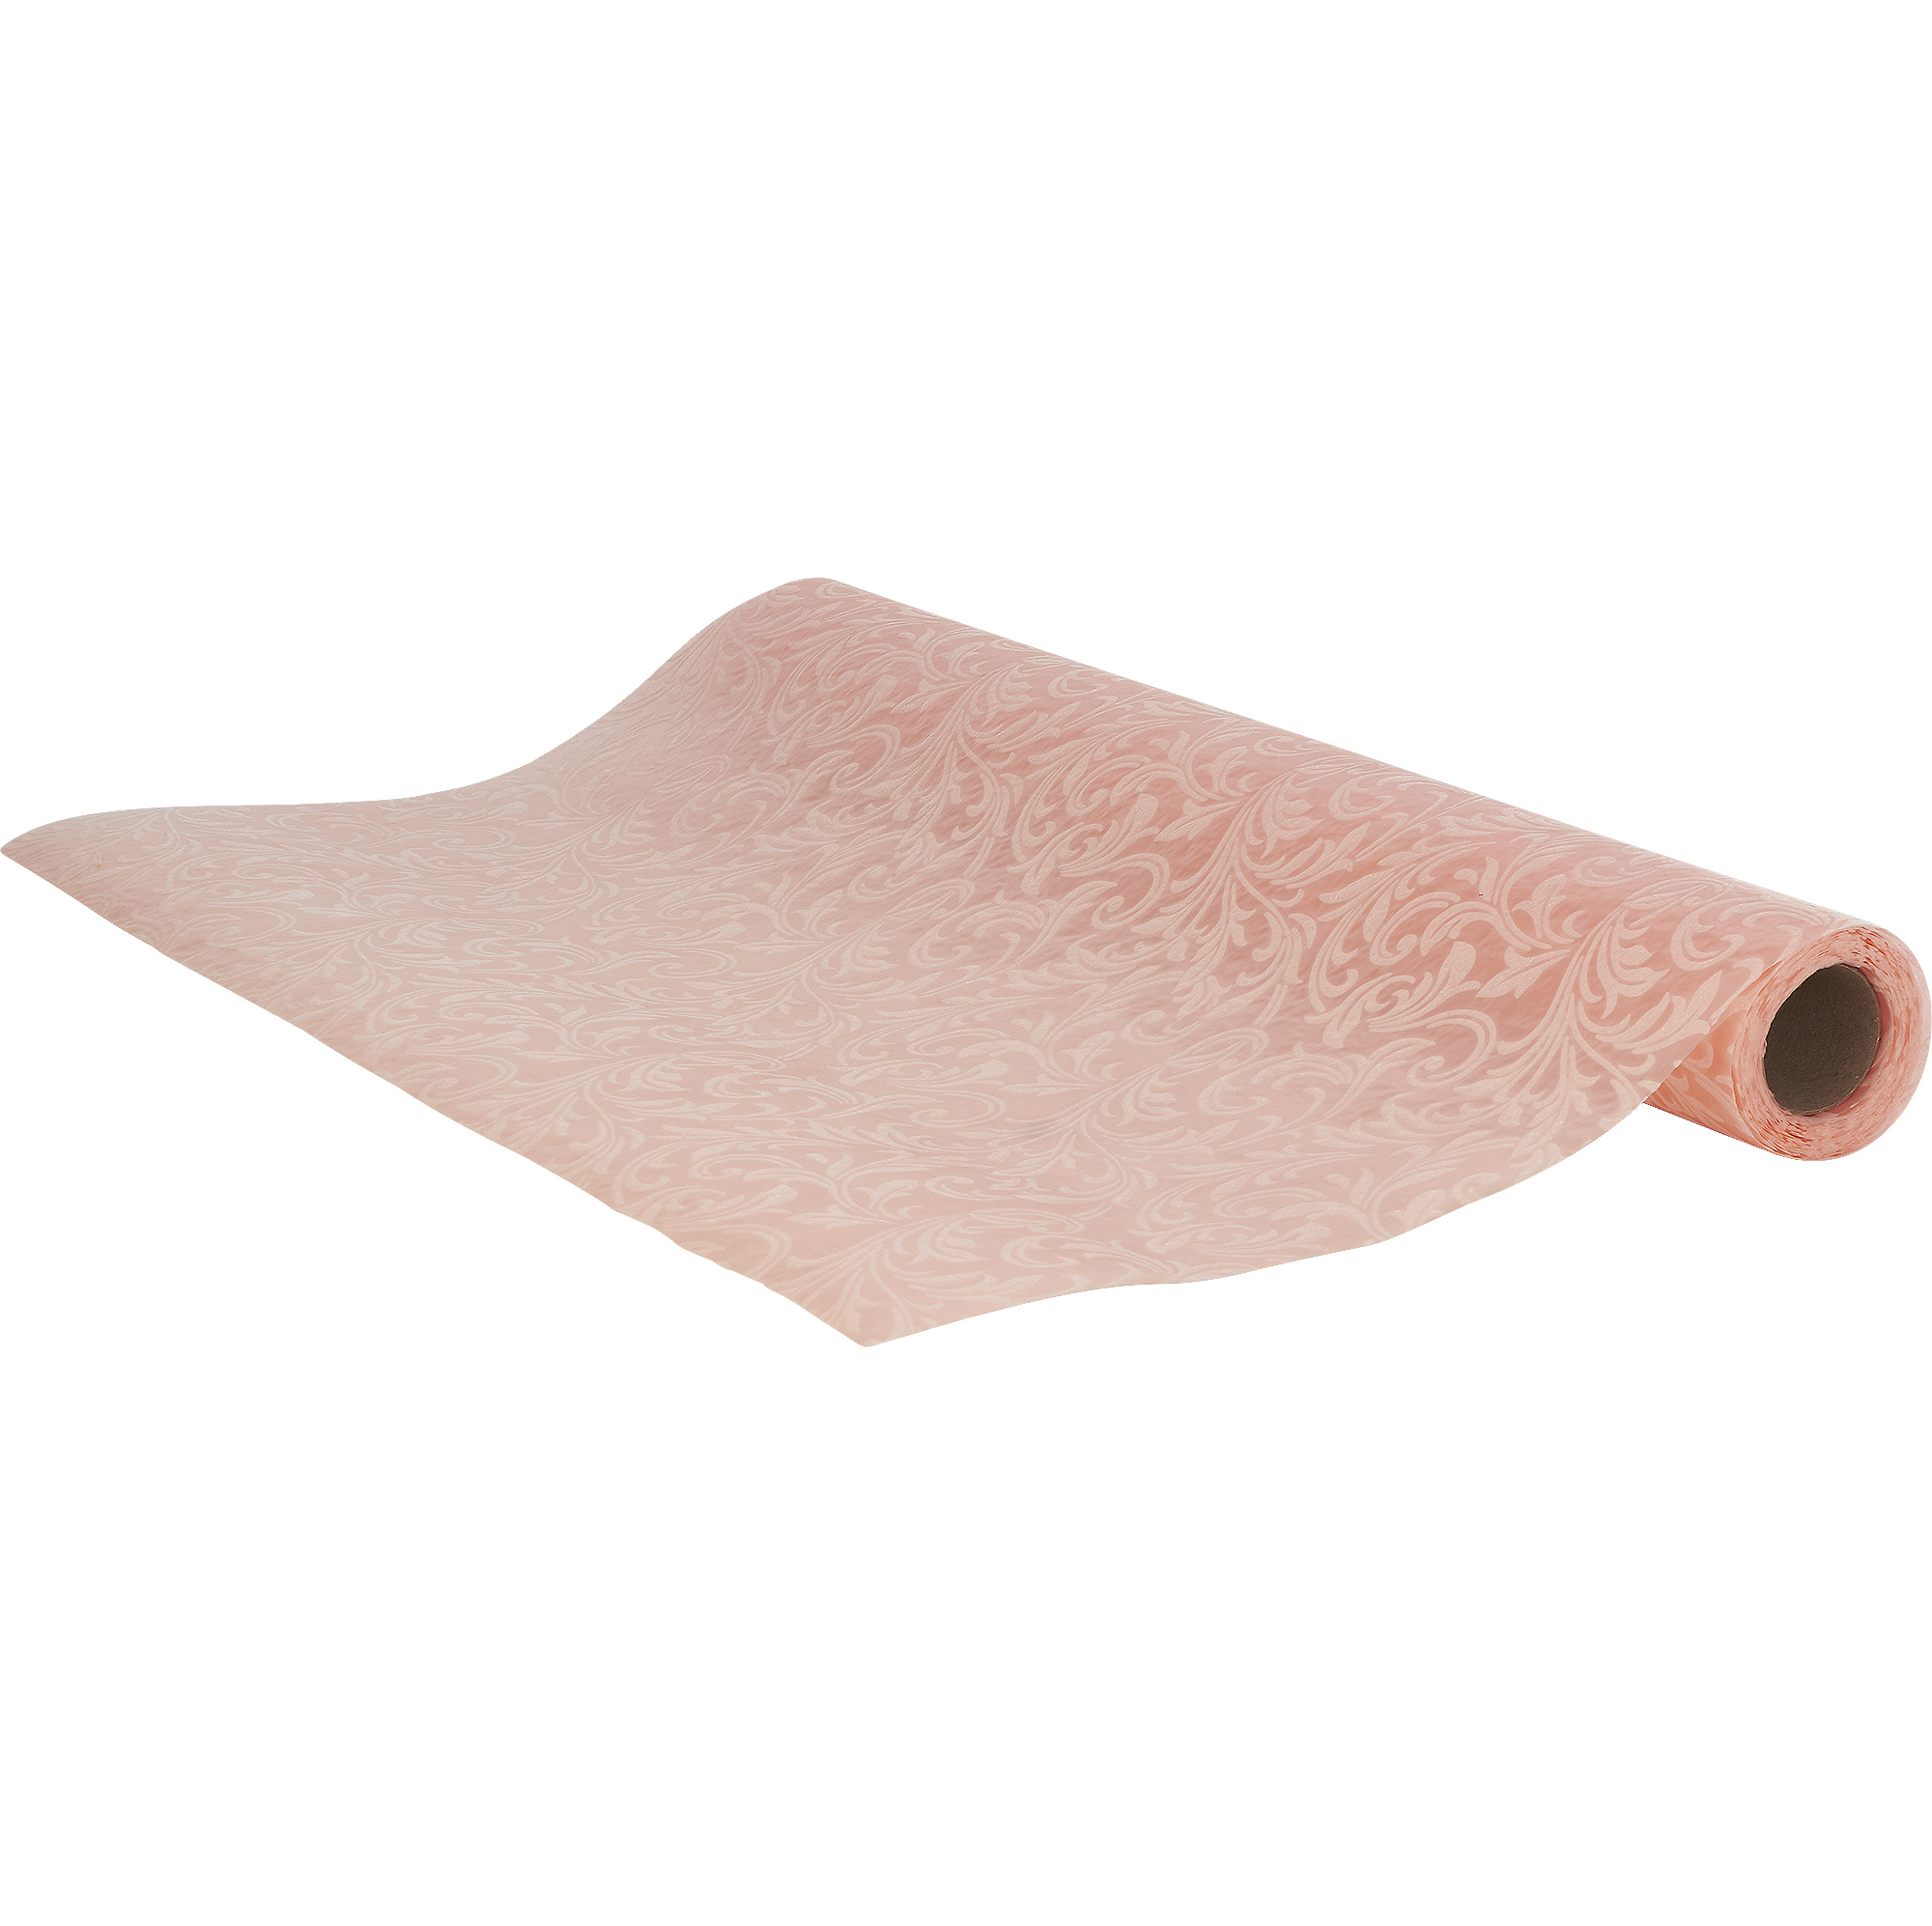 Embossed Nonwoven Floral Wrapping Paper Roll 21" x 5yd - Pink